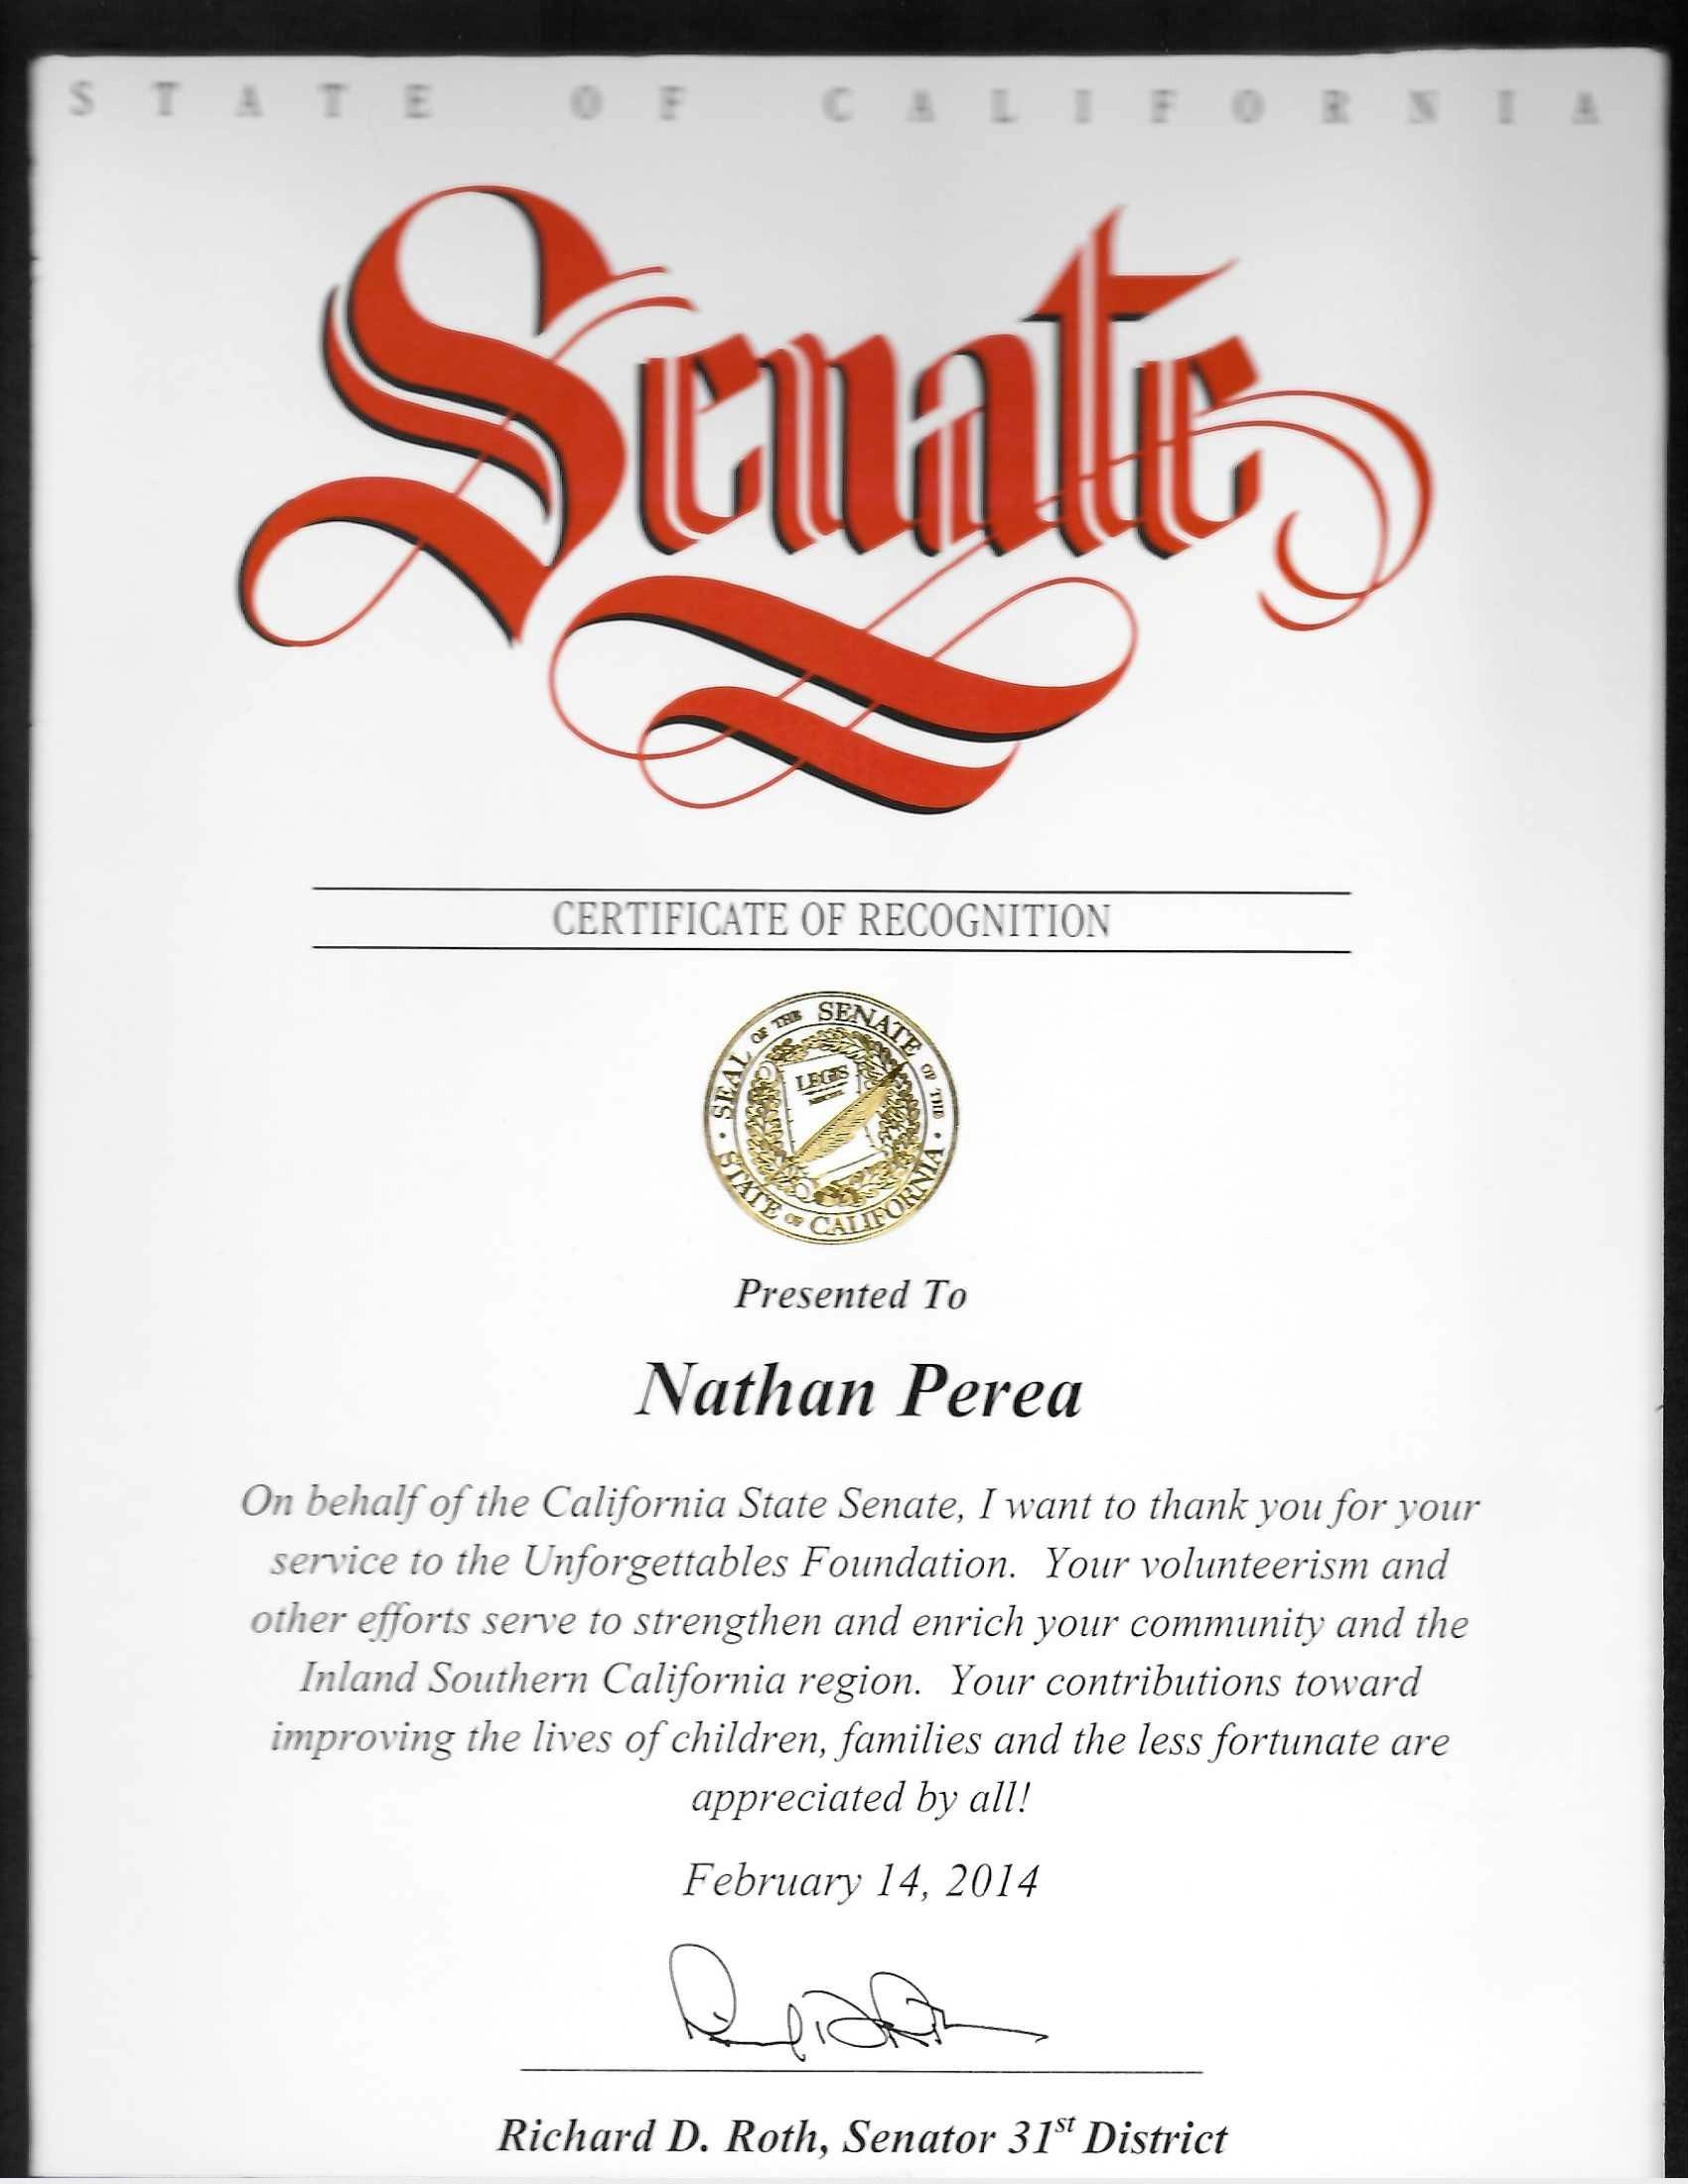 California State Senate Certificate of Recognition to Nathan Perea